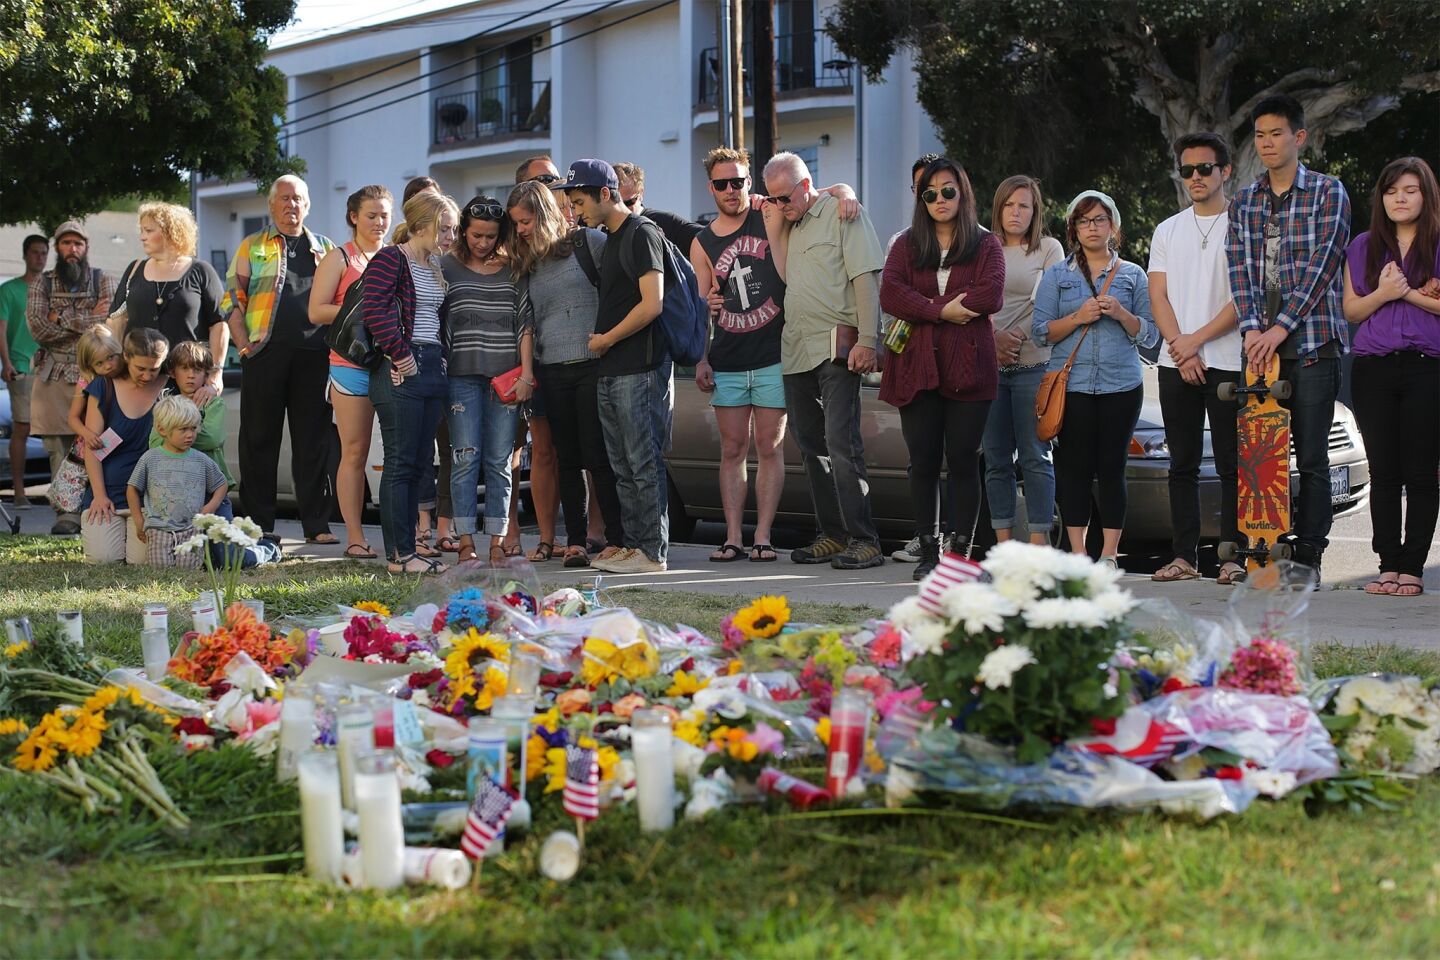 A large crowd gathers to pray and remember shooting victims Veronika Weiss and Katie Cooper outside the Alpha Phi sorority house in Isla Vista.